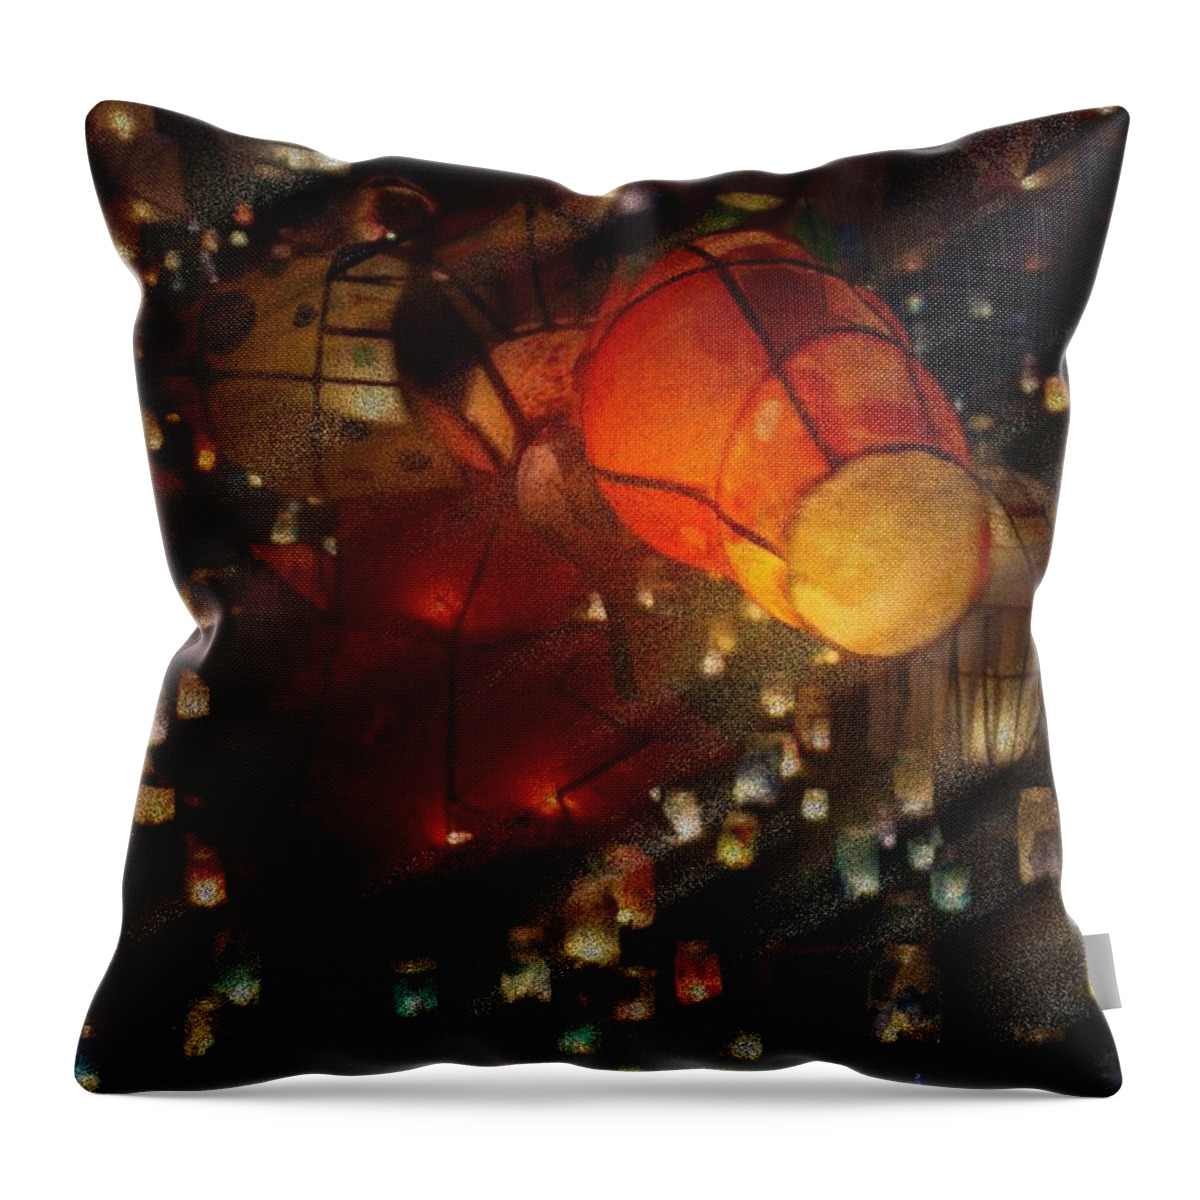 Lanterns Throw Pillow featuring the photograph Colorful Lanterns by Zinvolle Art